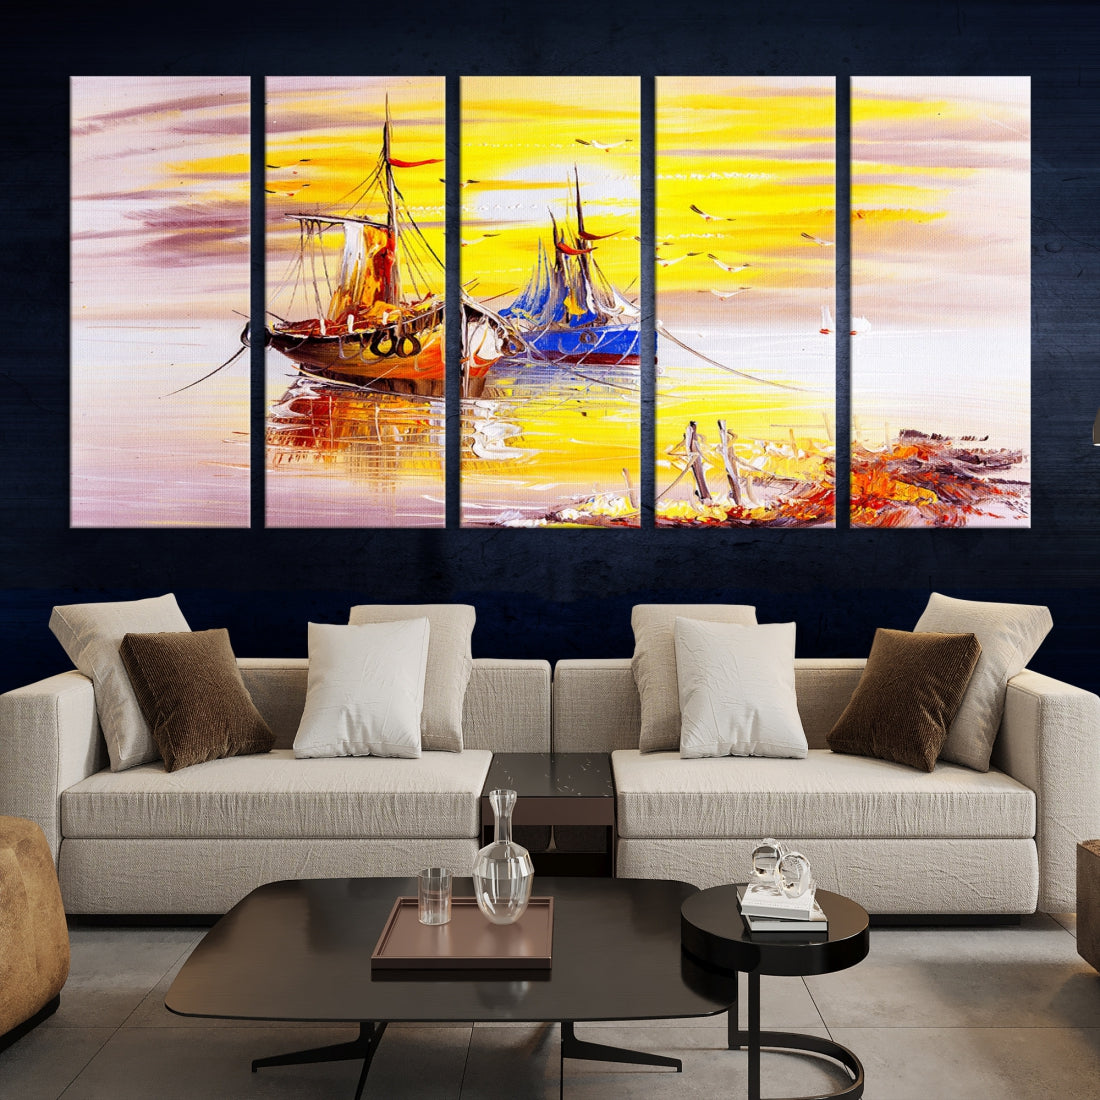 Glamorous Sunset and Boats Oil Painting Large Wall Art Canvas Print